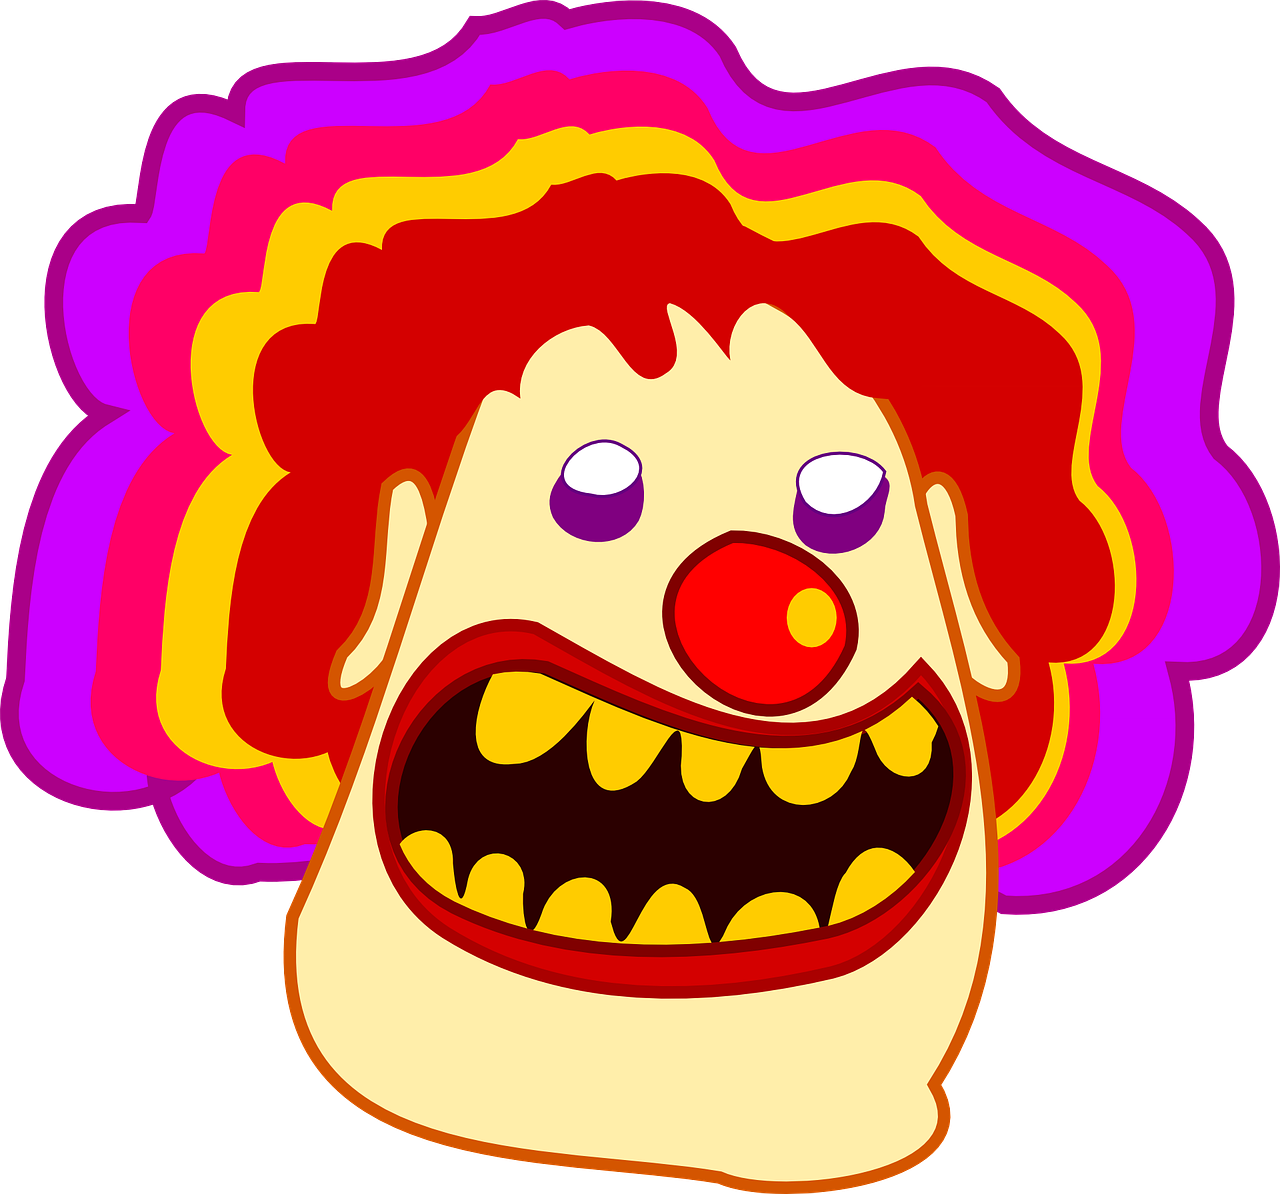 a cartoon clown with a big smile on his face, an illustration of, lowbrow, very scary photo, some red and purple and yellow, extreme illustration